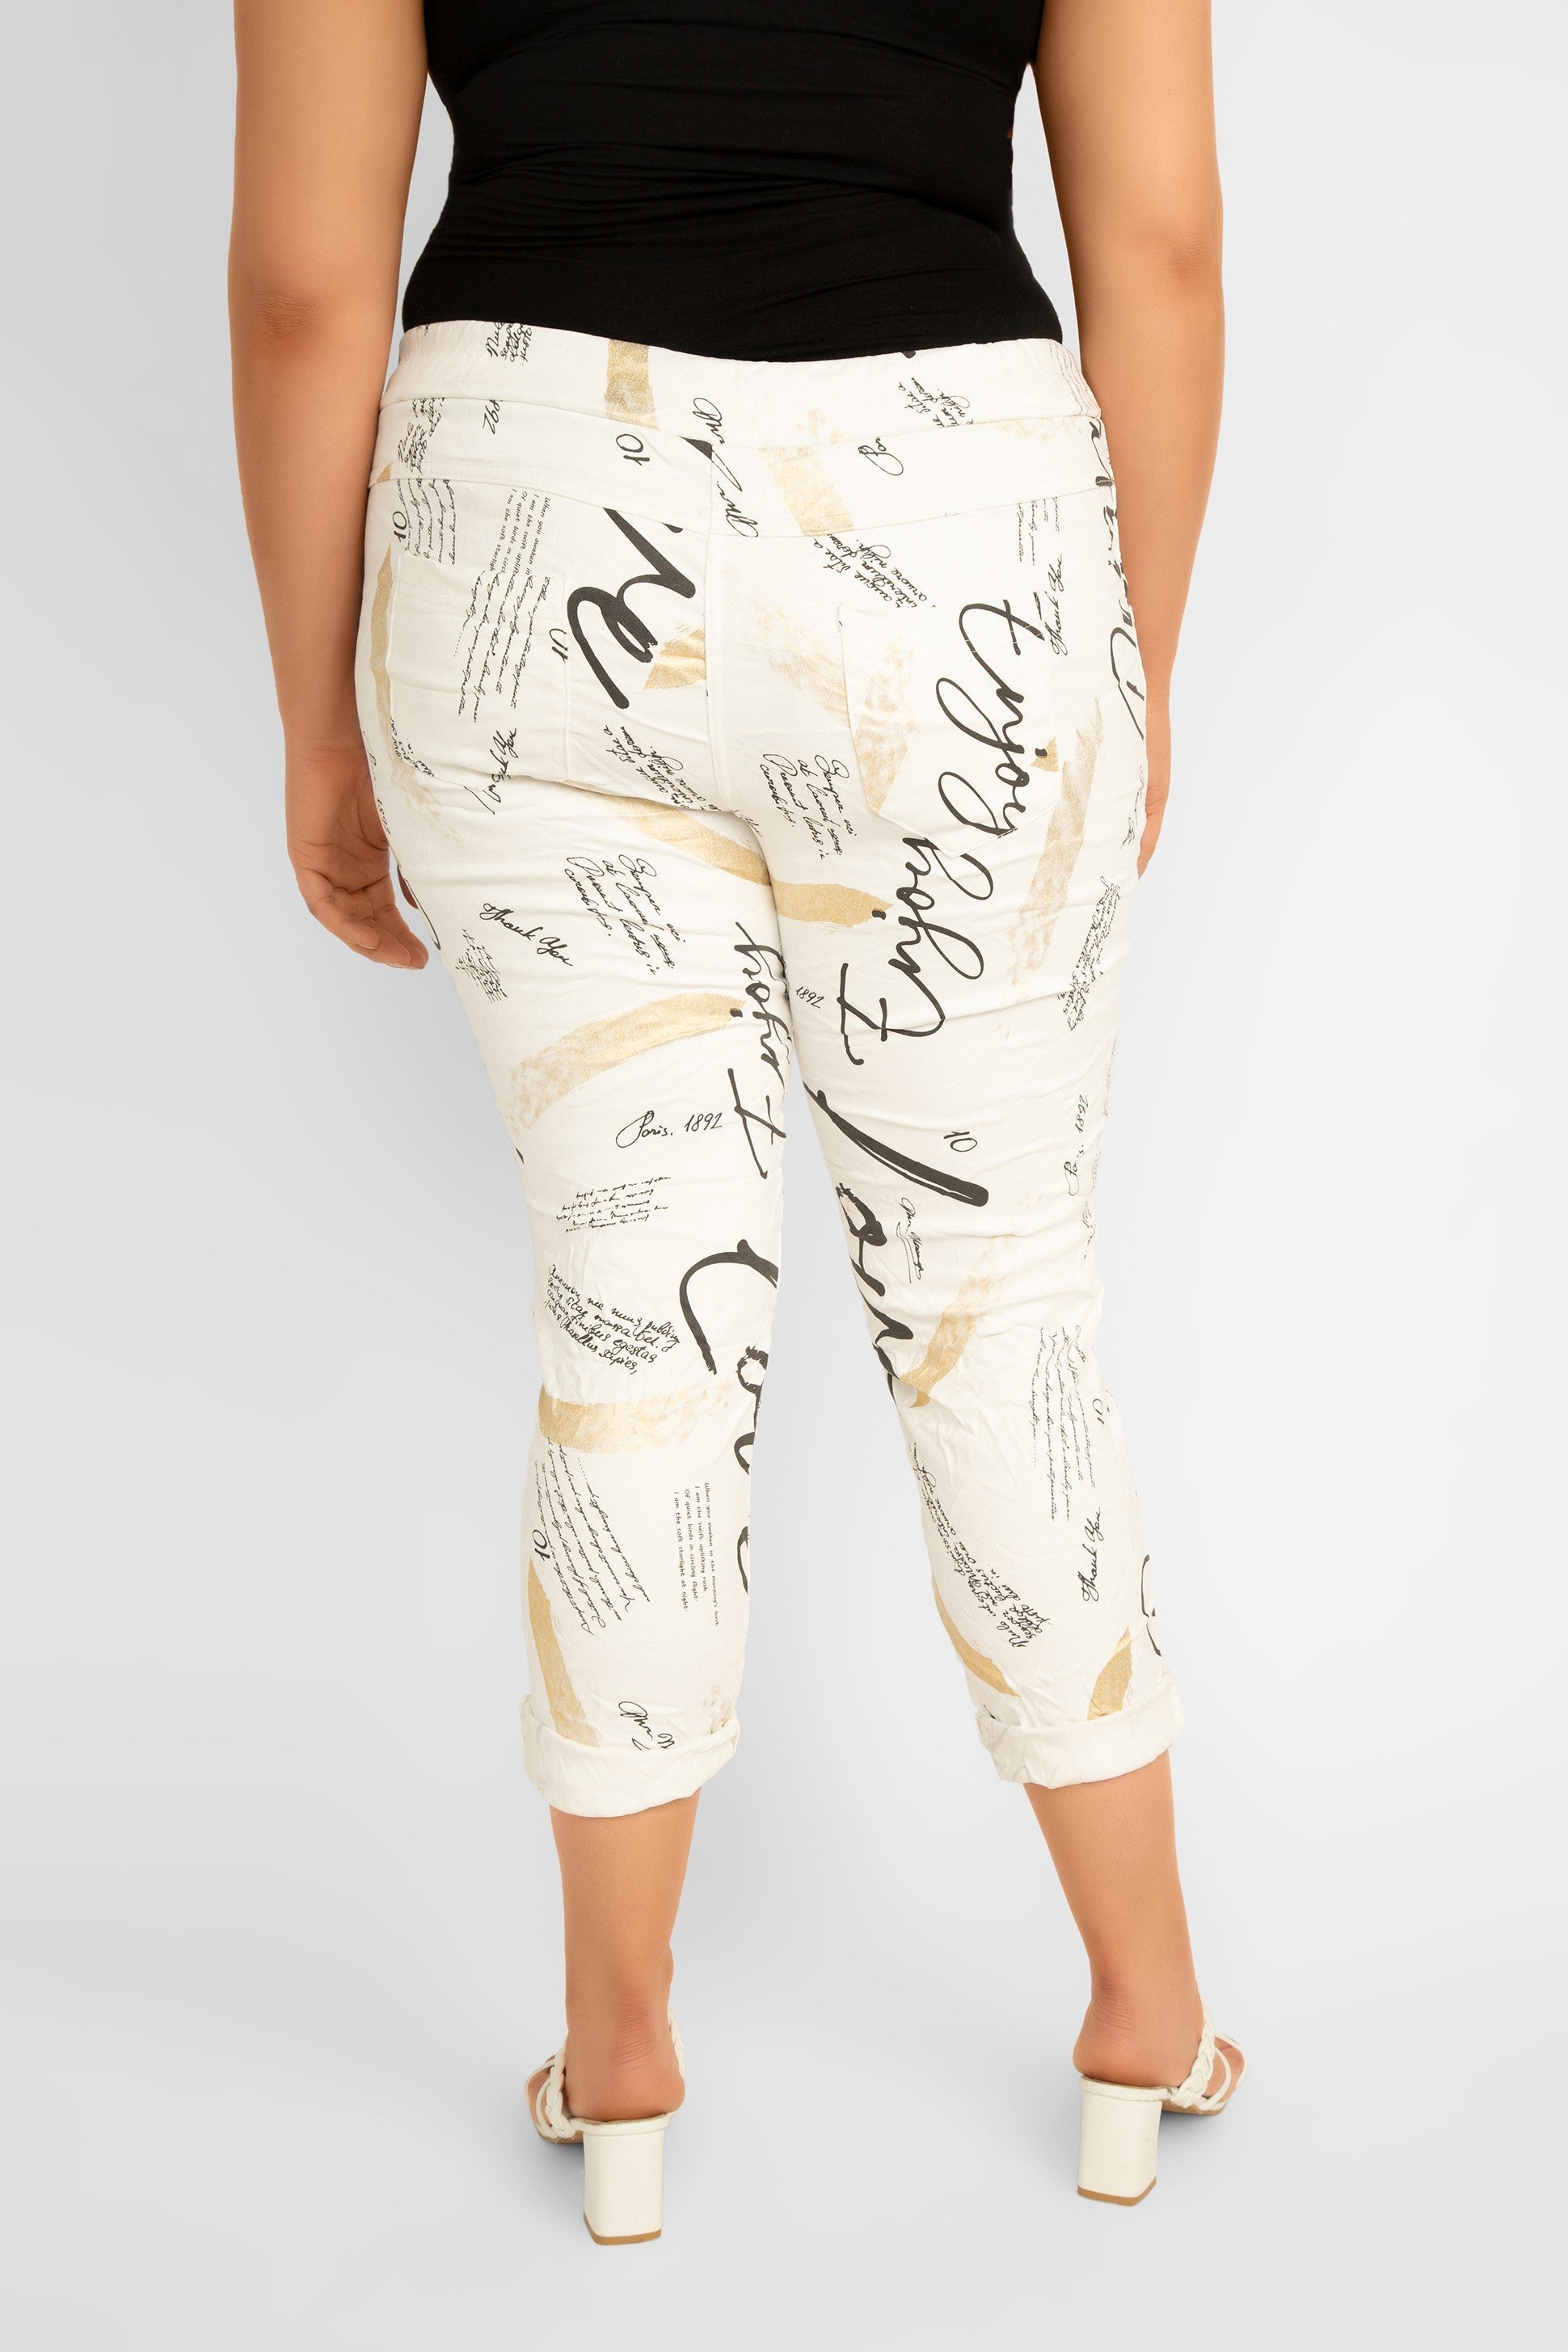 Bella Amore (68511) Women's Cropped Diagonal Zipper Pocket Pants in a Graphic print featuring black topography and gold foil streaks over a creamy white background